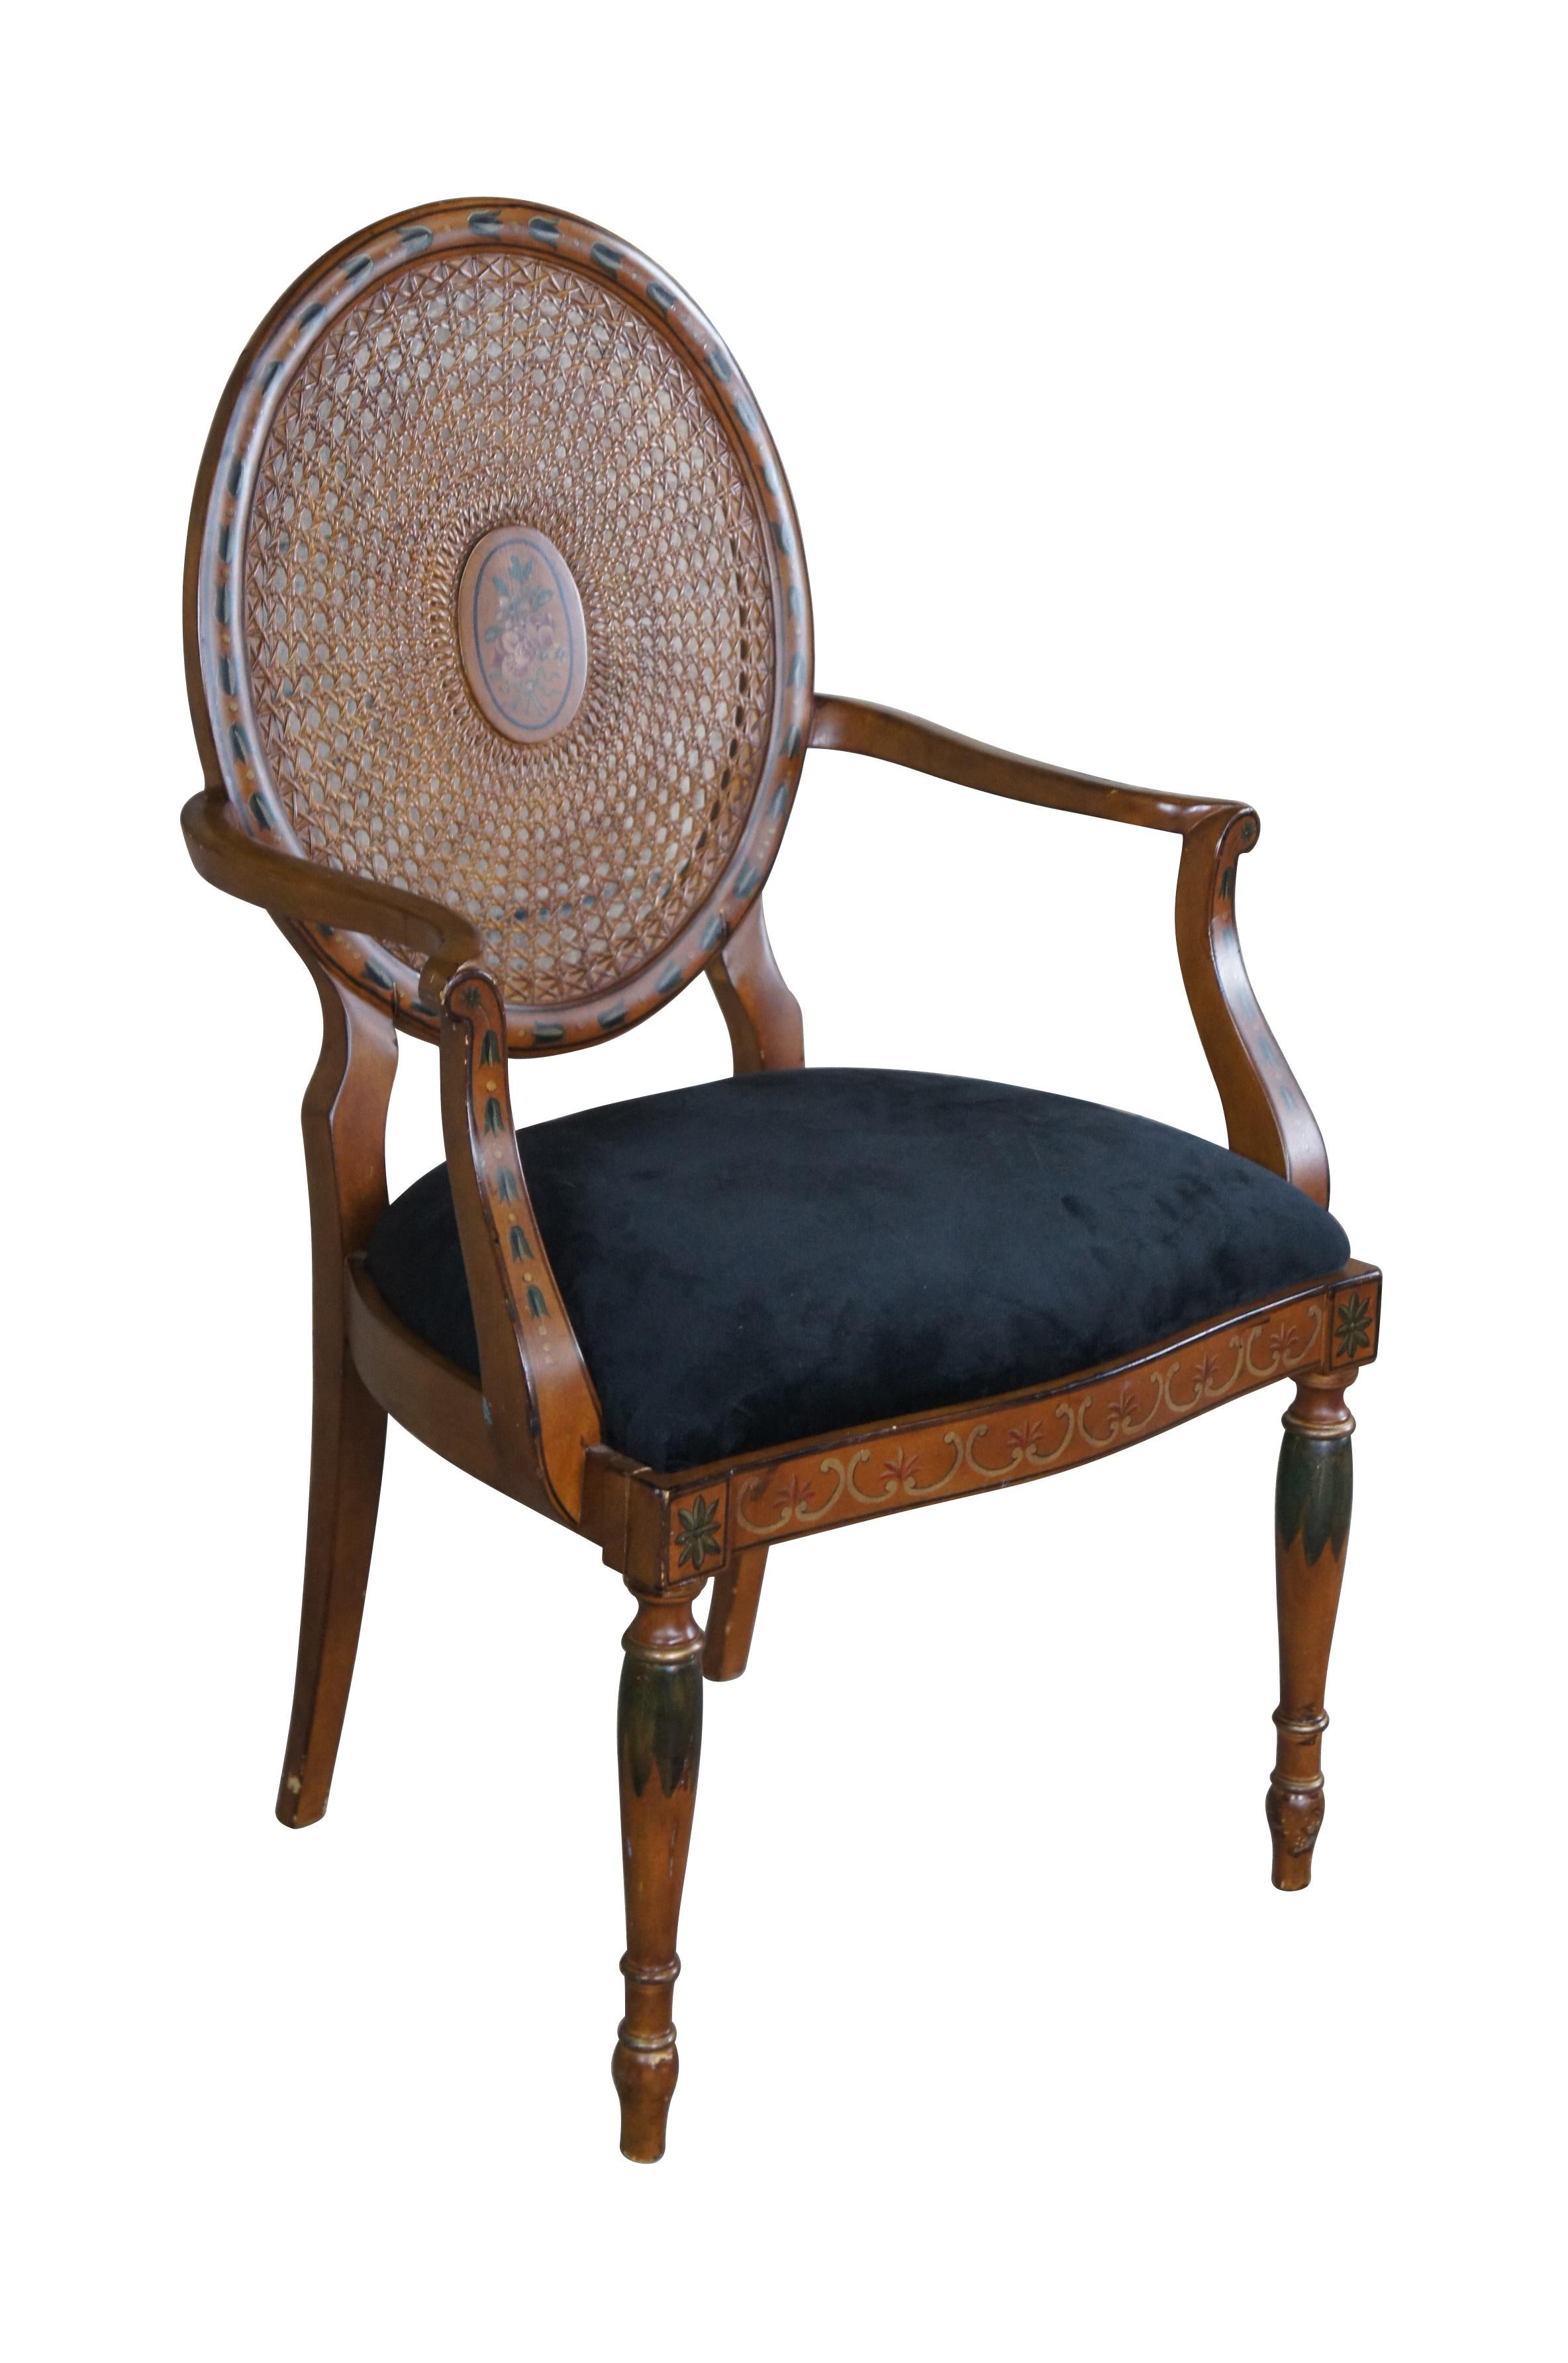 Vintage Pulaski Furniture armchair. Featuring Louis XVI styling with caned wheel back, flared arms and hand painted details. Made in Italy.

Dimensions:
25.5